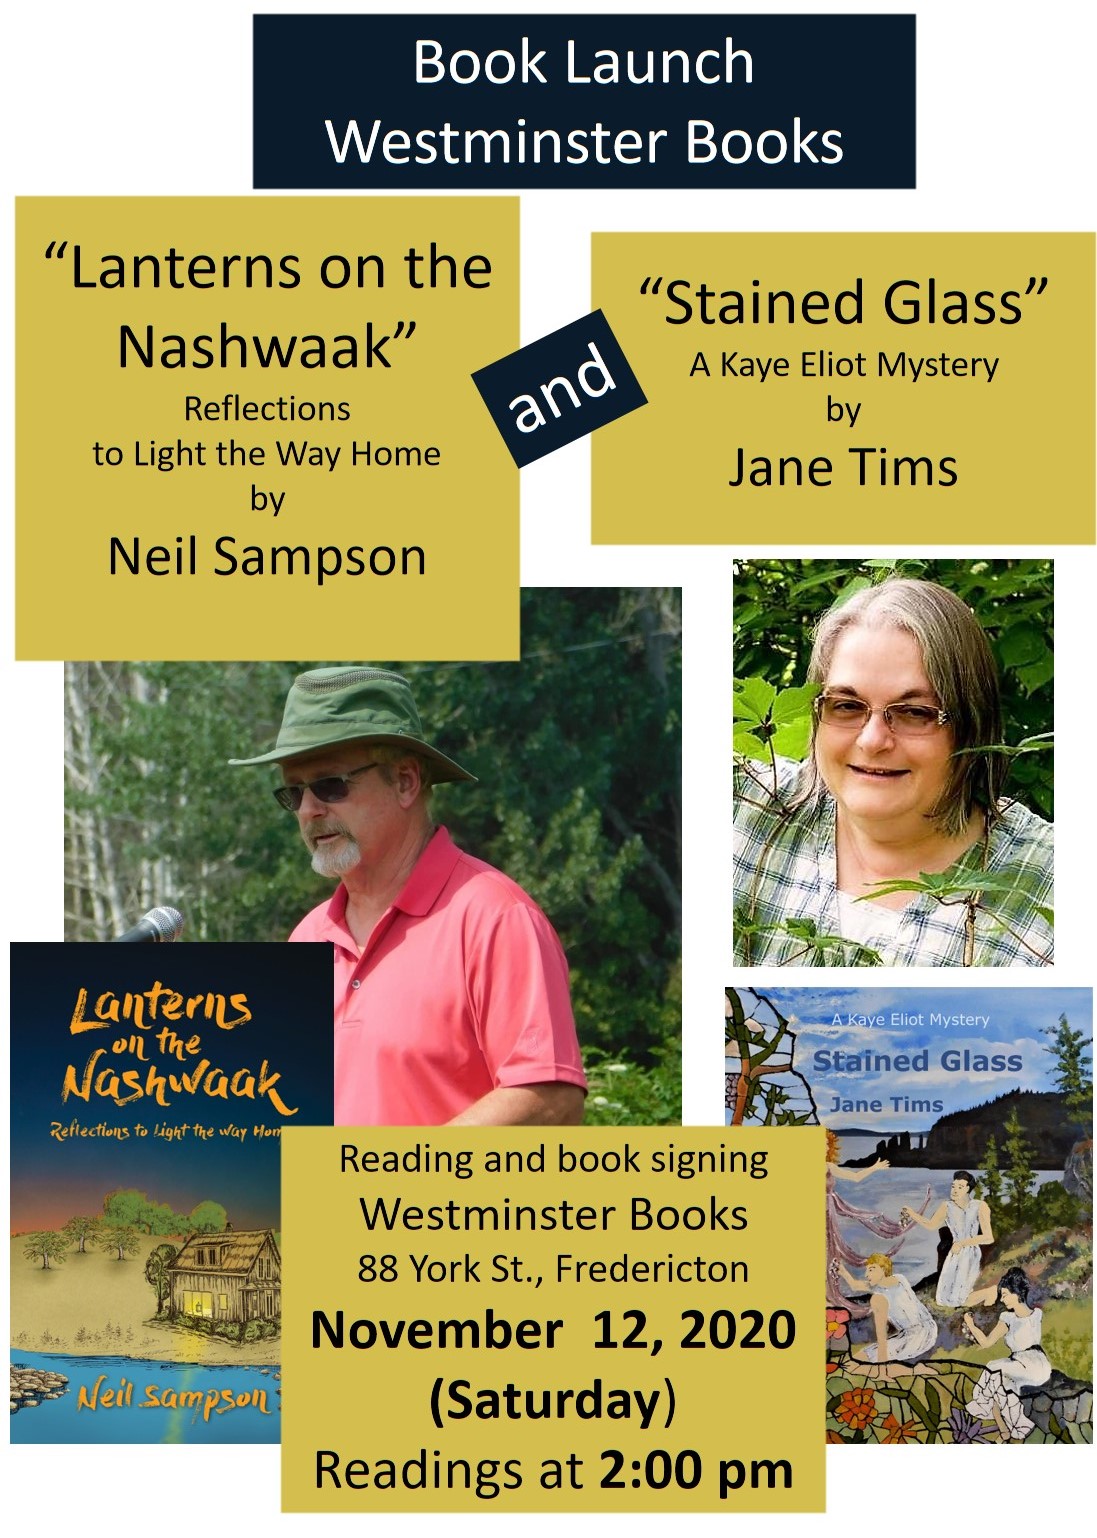 Lanterns on the Nashwaak, Refletions to Light the Way Home by Neil Sampson and Stained Glass, a Kaye Eliot Mystery by Jane Tims at Westminster Books, November 12, 2022